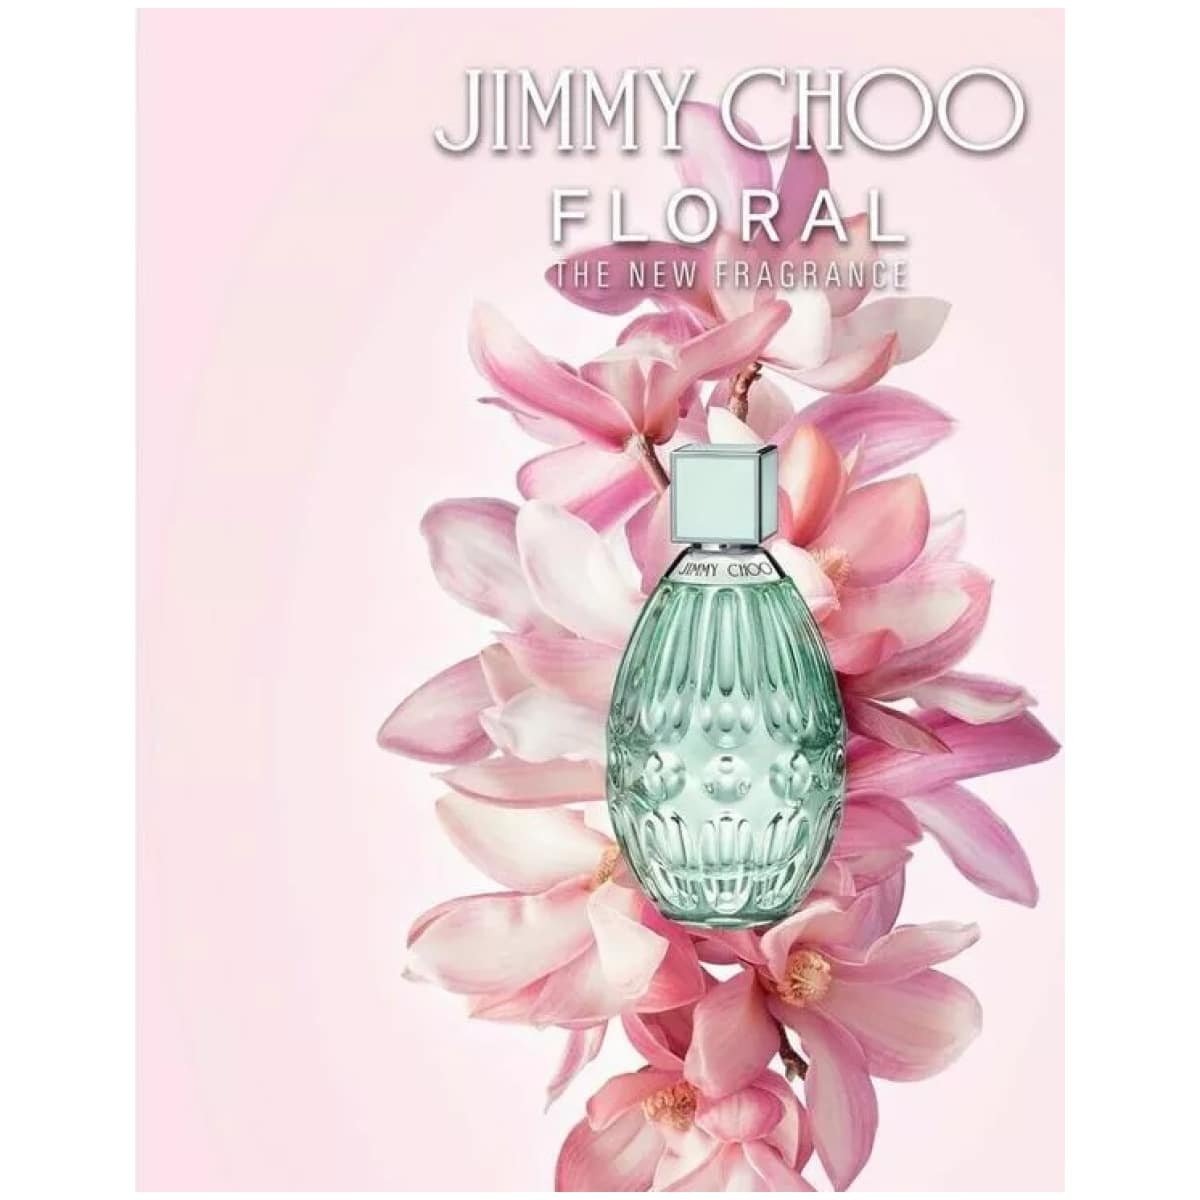 Jimmy Jimmy Choo Floral EDT Perfume For Women 90 mlChoo Floarl EDT Perfume For Women 4.5 ml